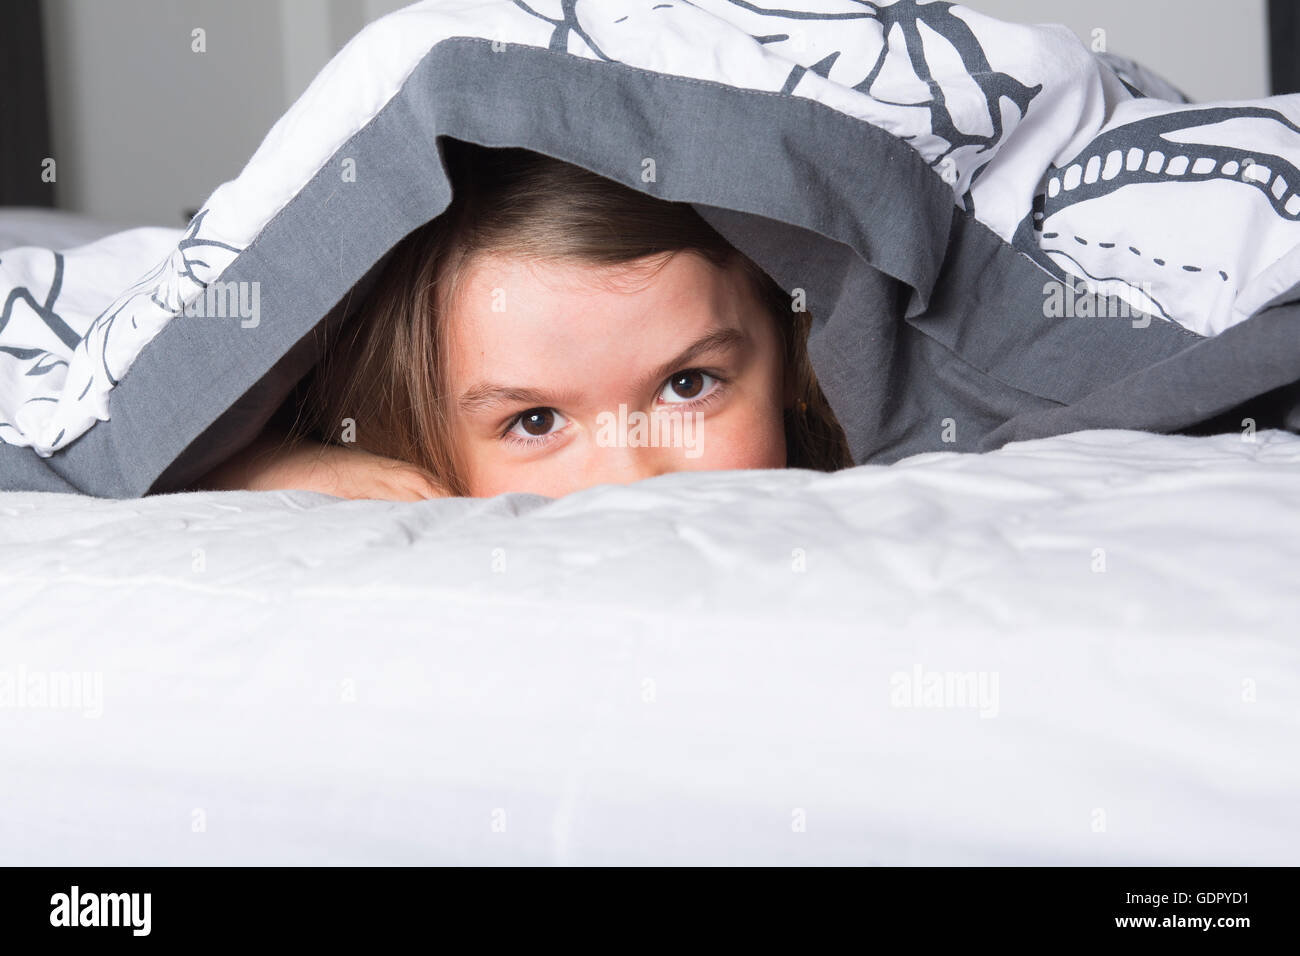 Child or teen under covers in bed Stock Photo